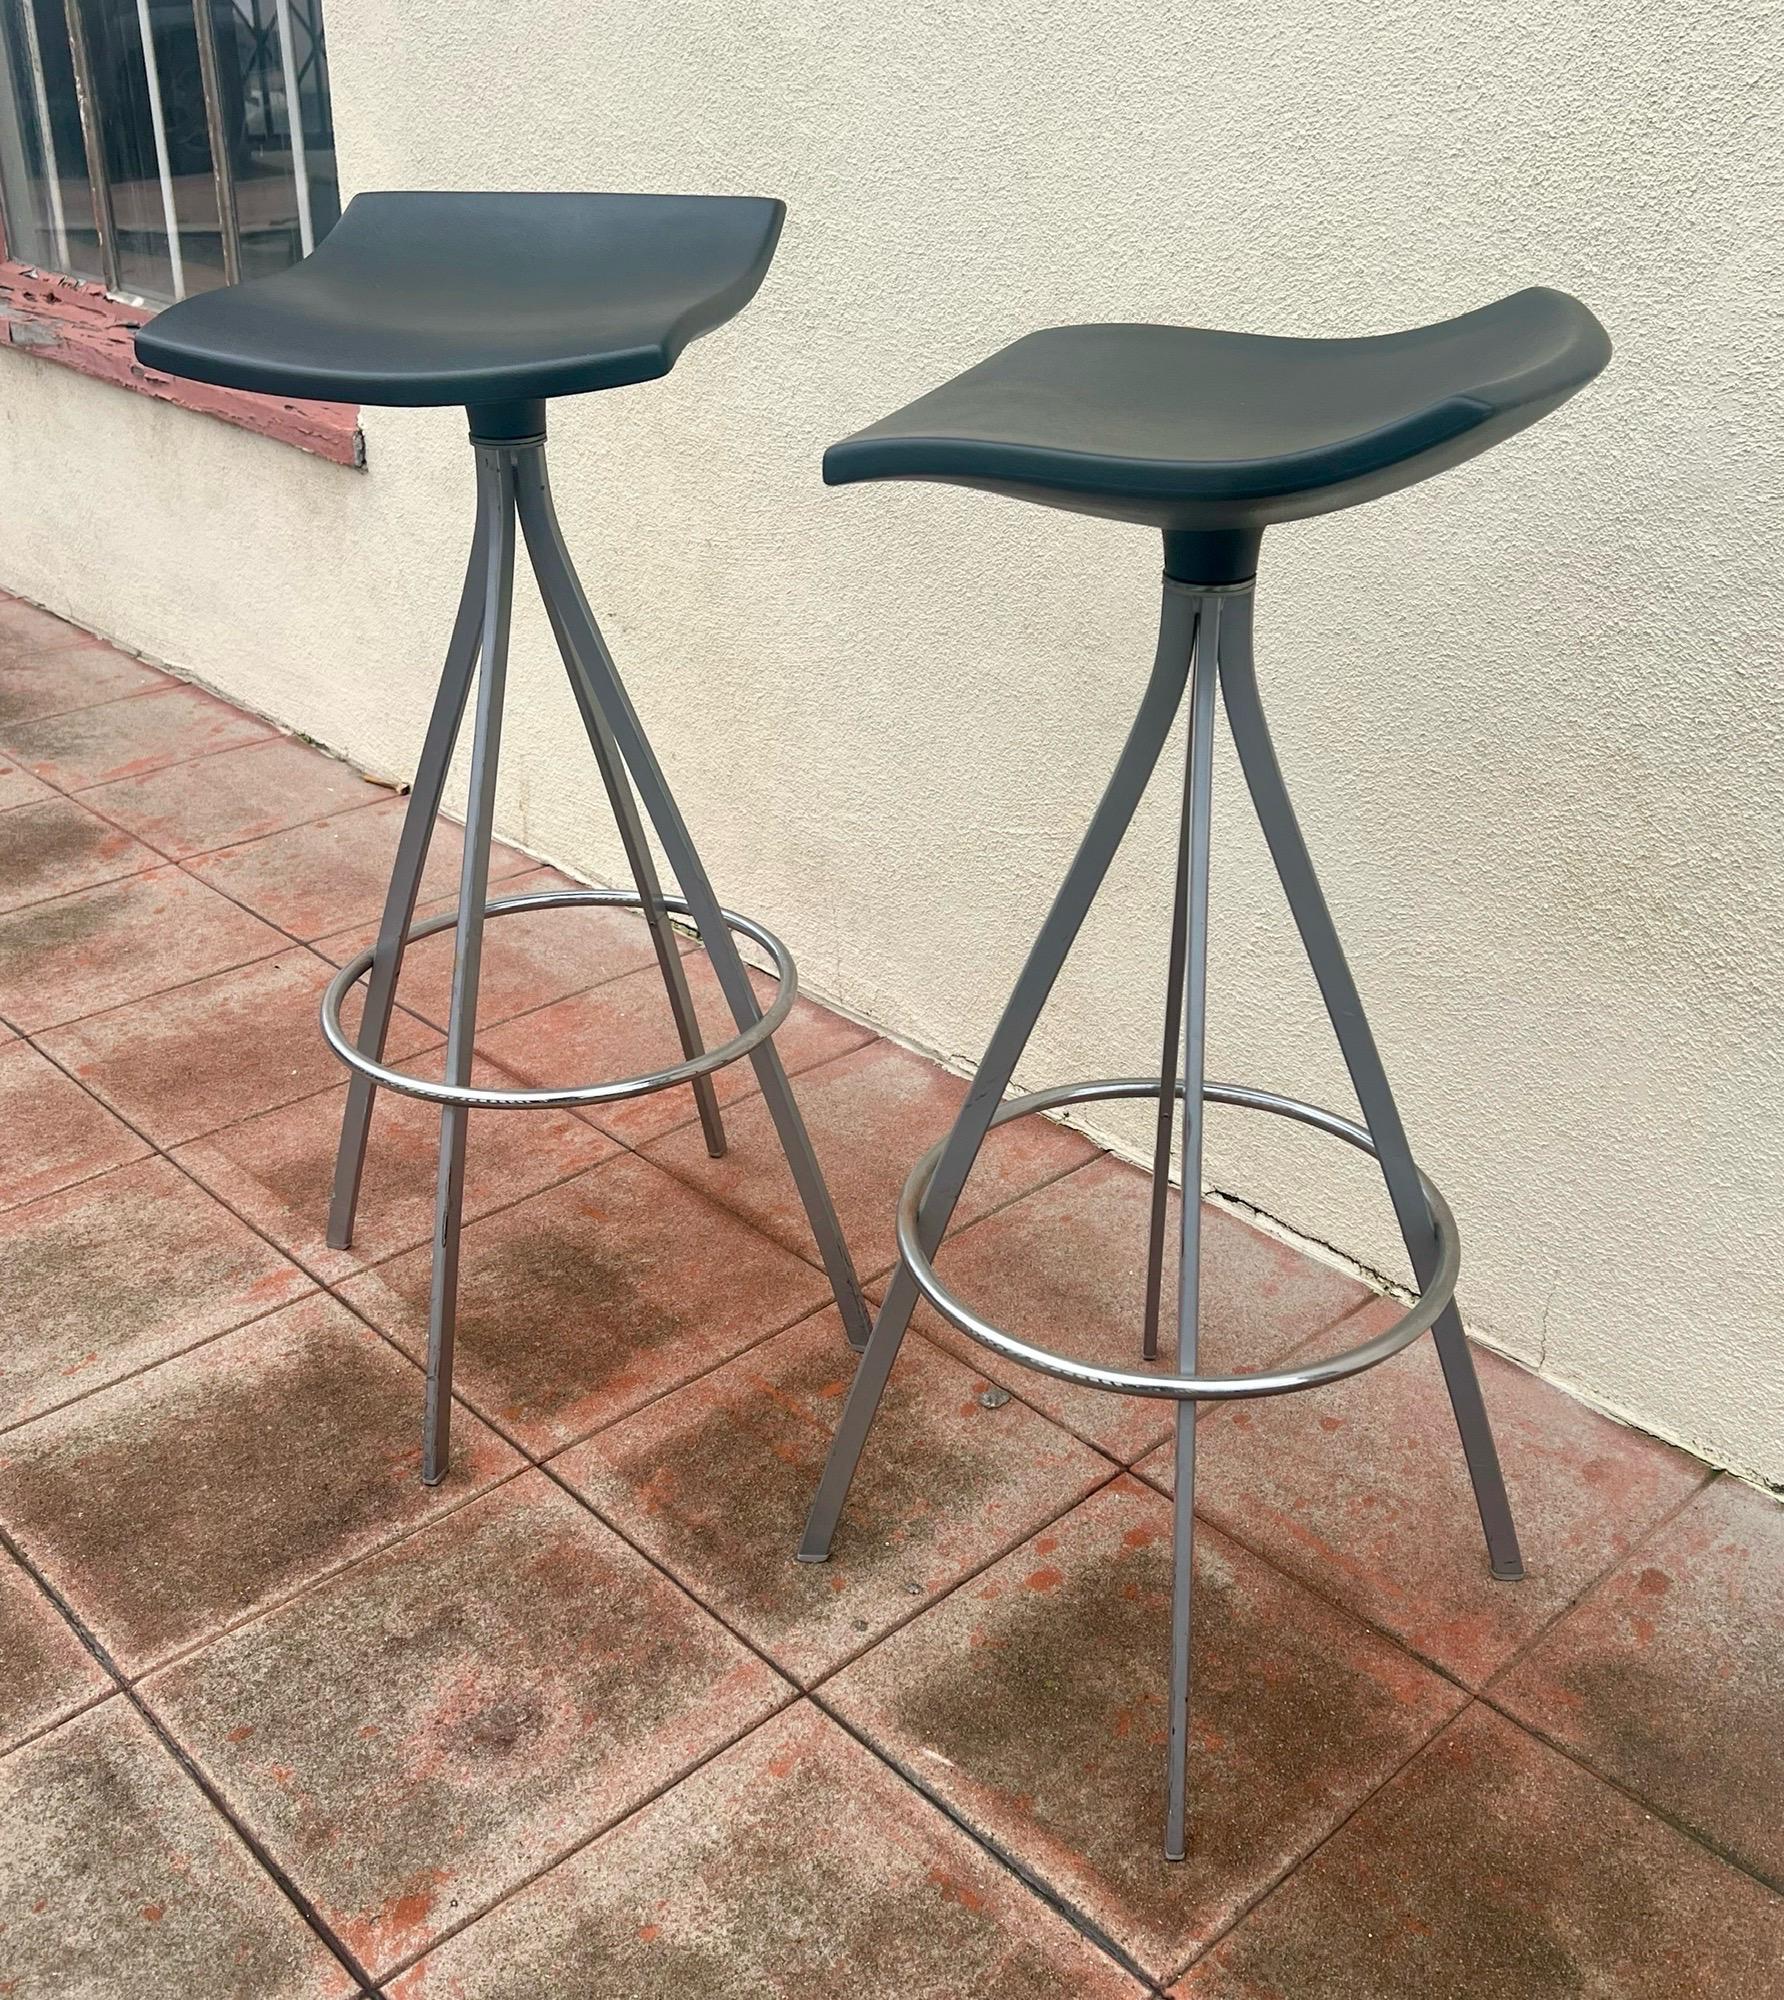 Pair of Postmodern stools Designed by Jorge Pensi for Mobles 114 Barcelona In Good Condition For Sale In San Diego, CA